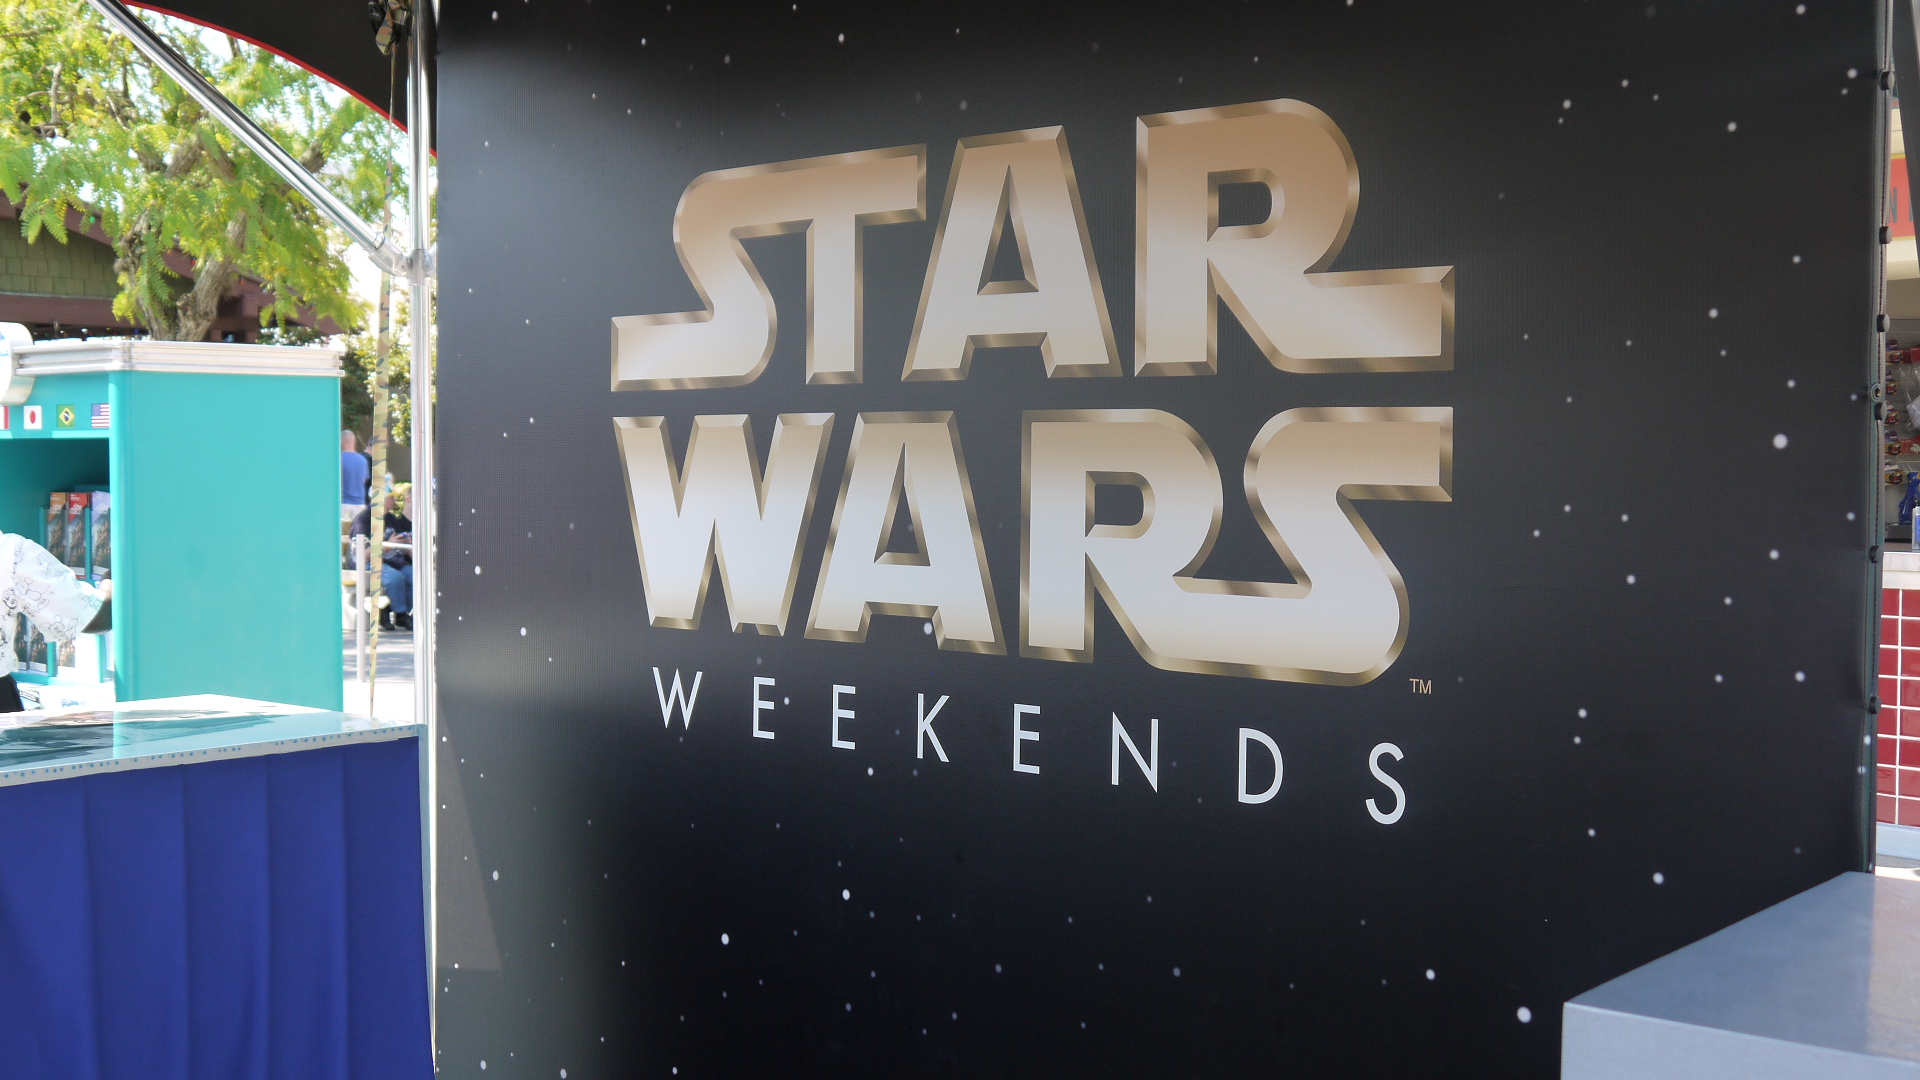 May 15th Marks the Return of Star Wars Weekends at Disney’s Hollywood Studios